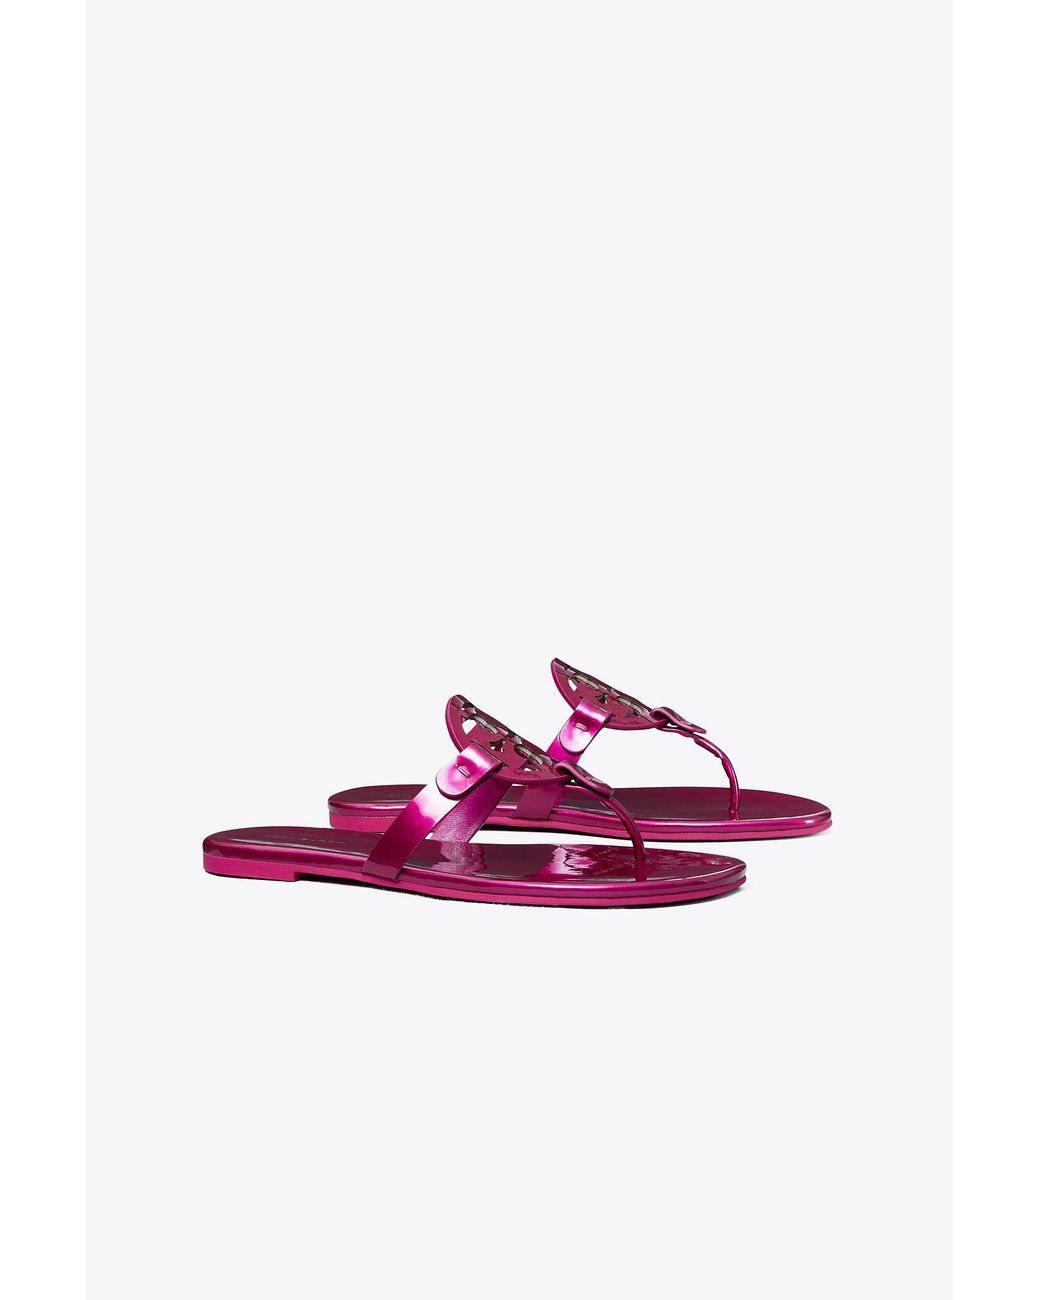 Tory Burch Miller Soft Patent Leather Sandal | Lyst